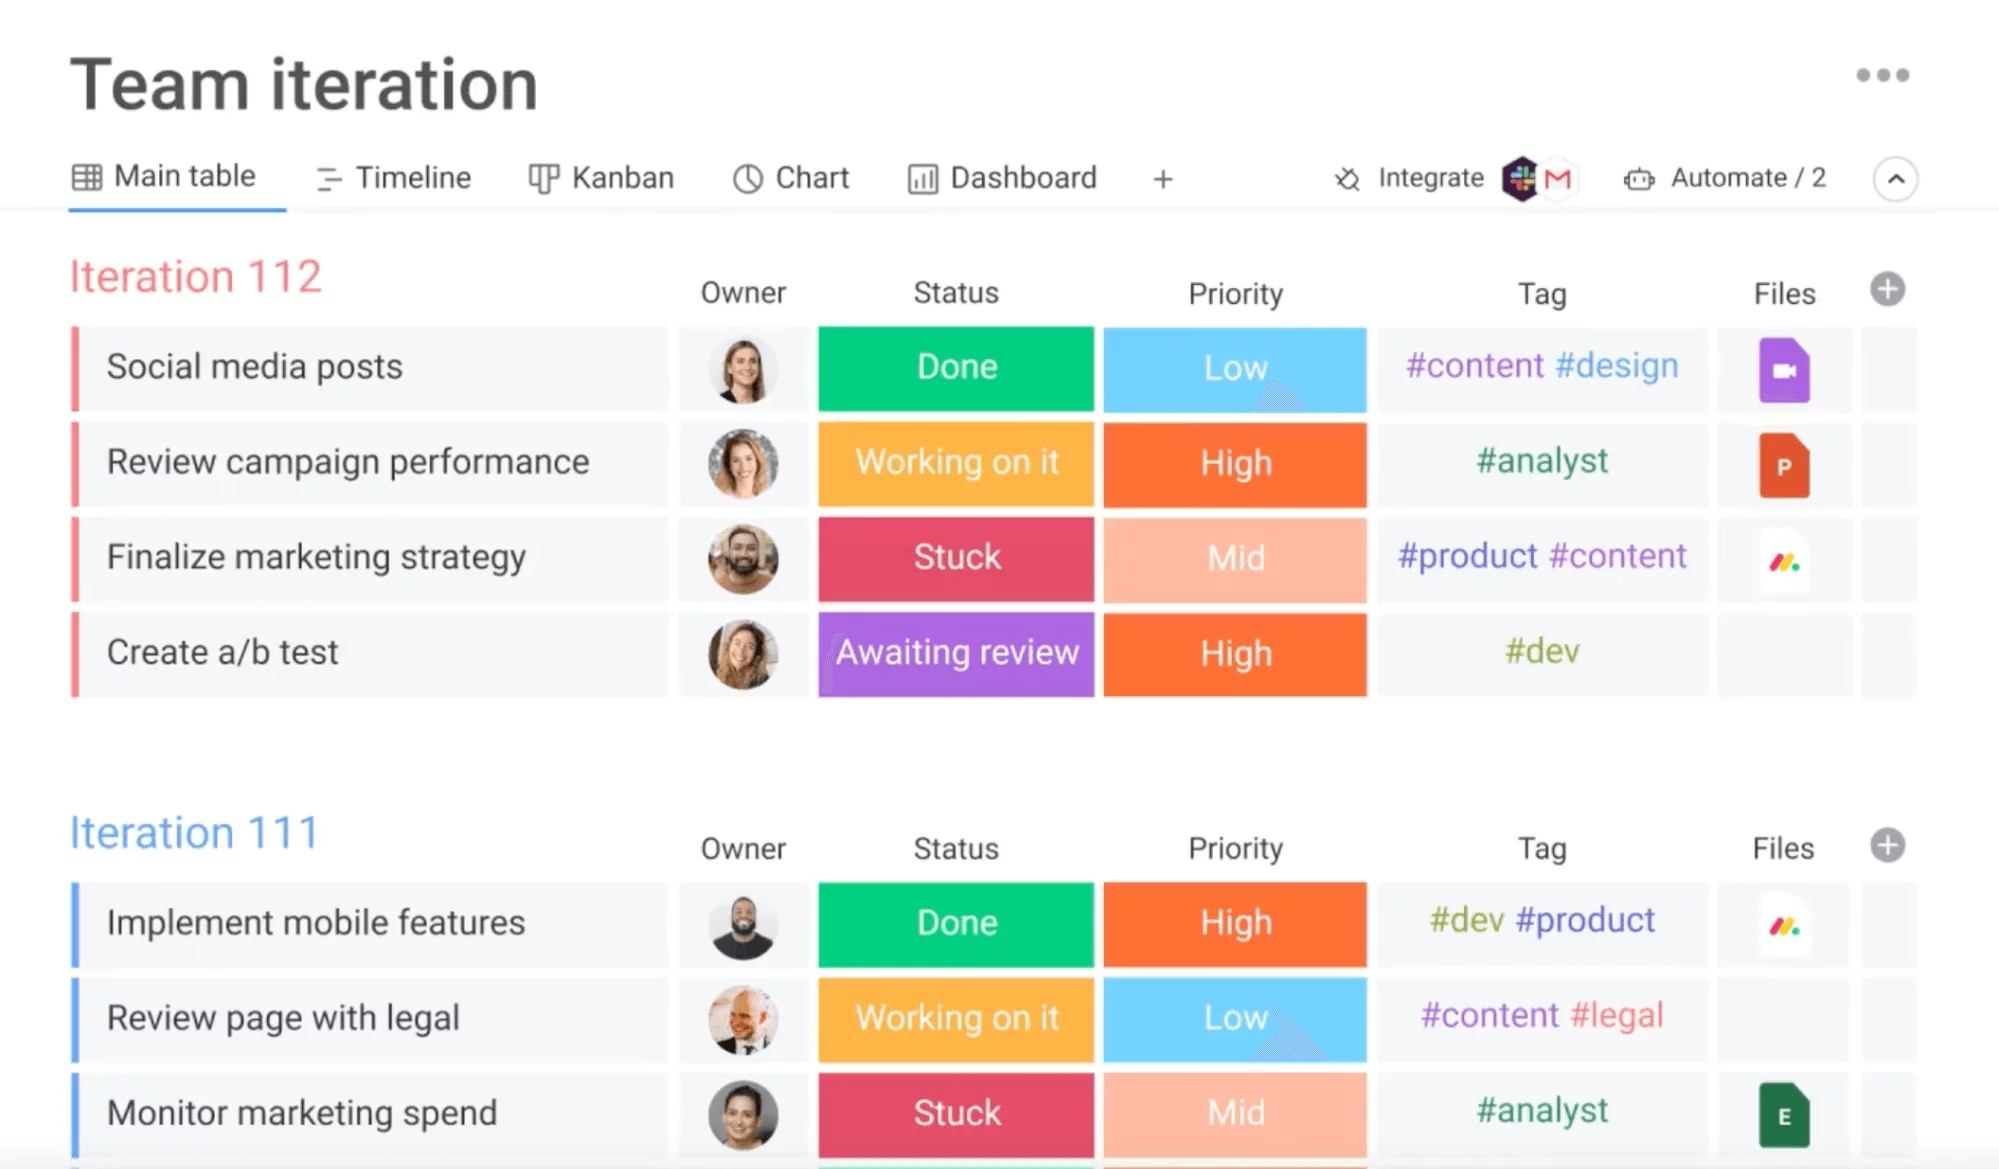 Monday screenshot showing a Team Iteration table with multiple tasks, owners, status, priority, tags and files.